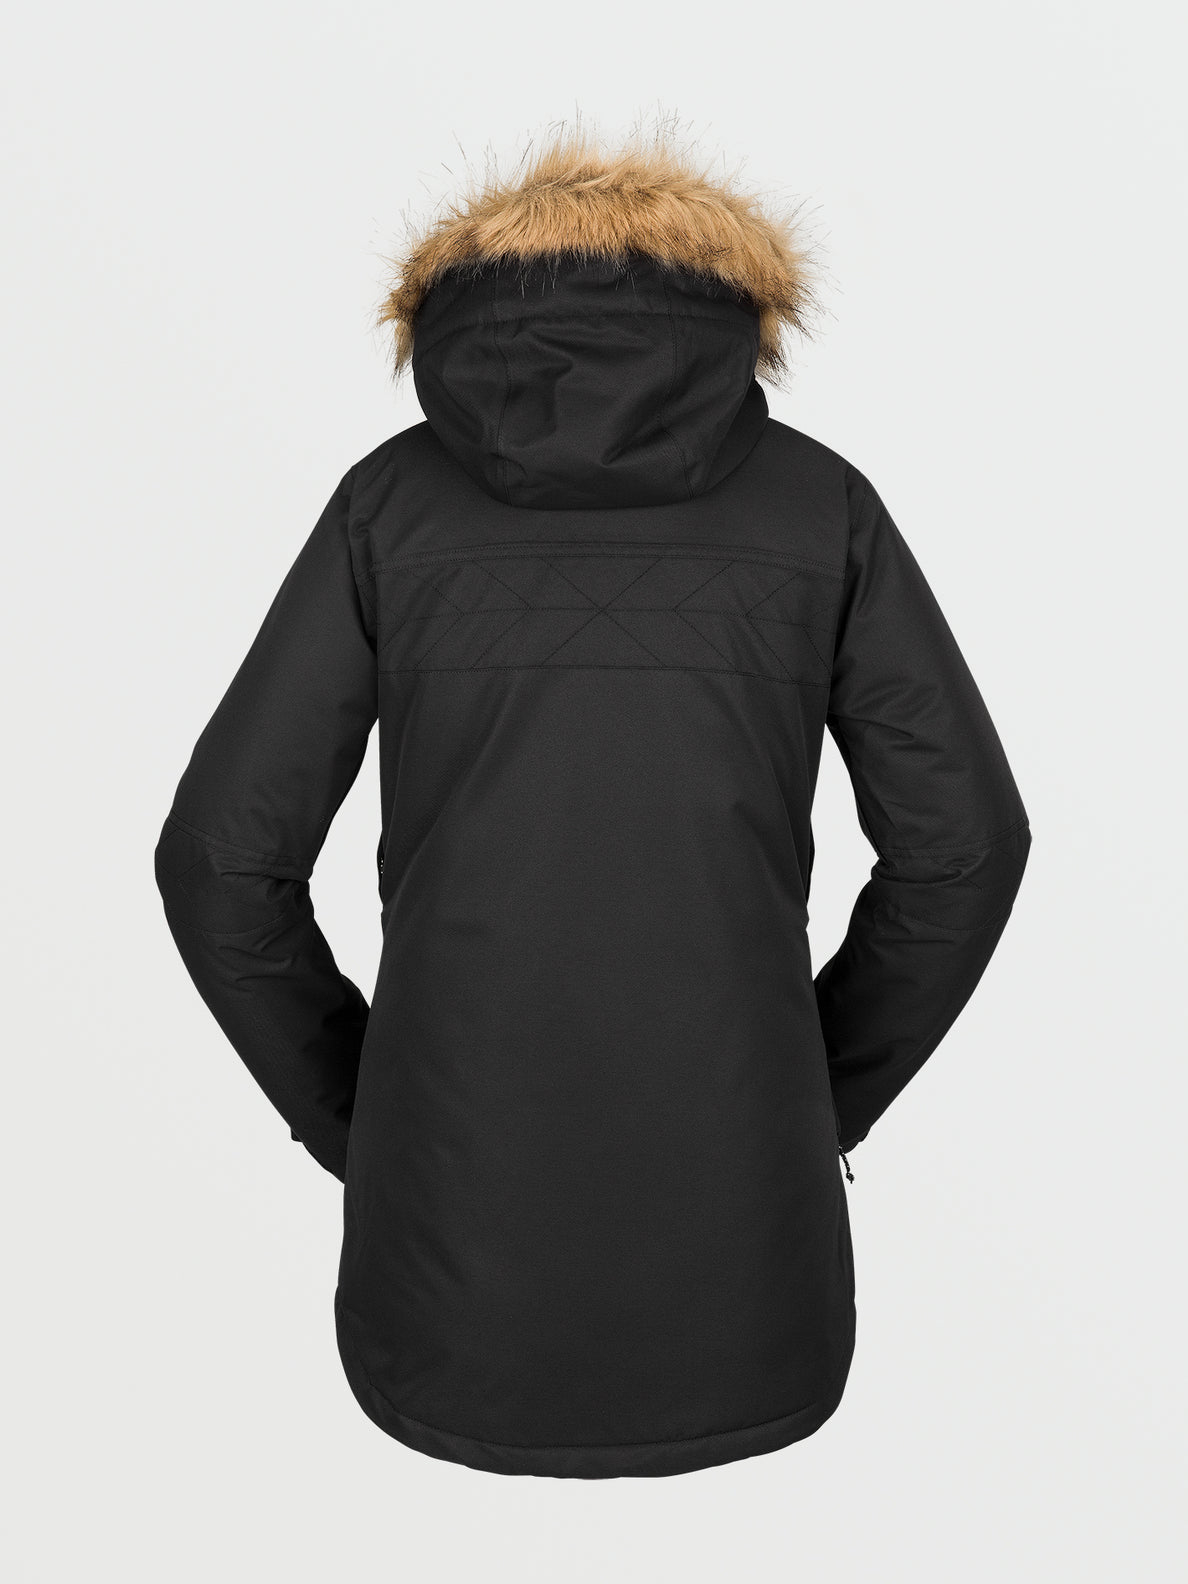 Womens Fawn Insulated Jacket - Black (H0452308_BLK) [7]